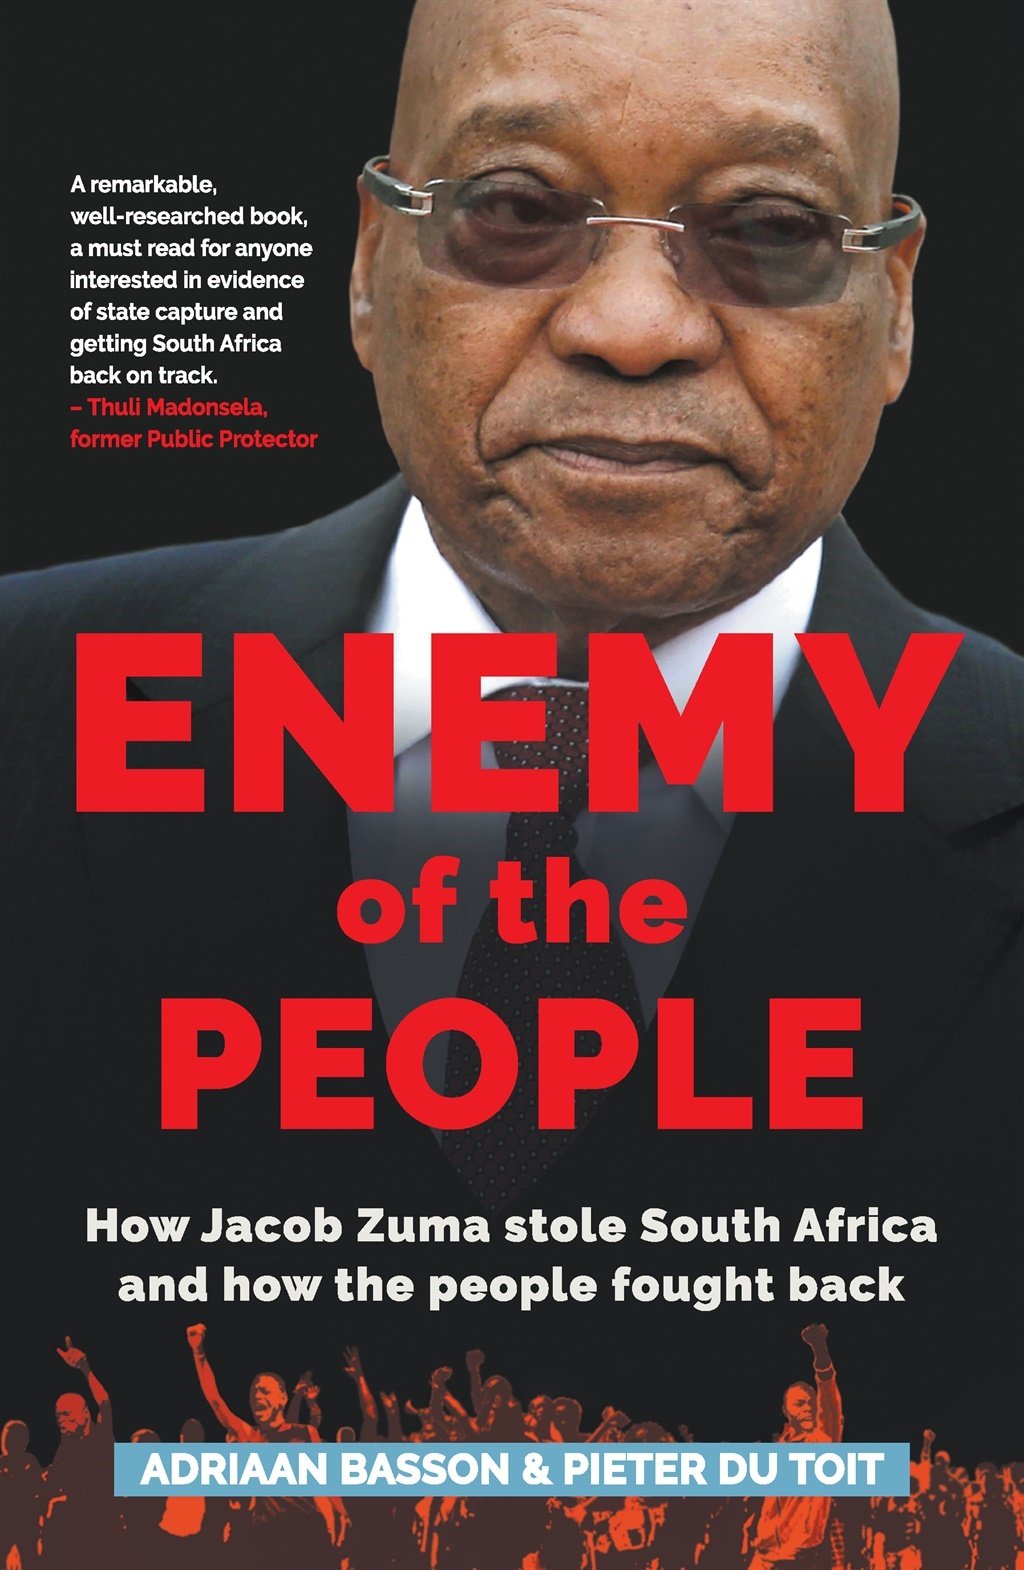 Enemy of the People (Jonathan Ball Publishers)